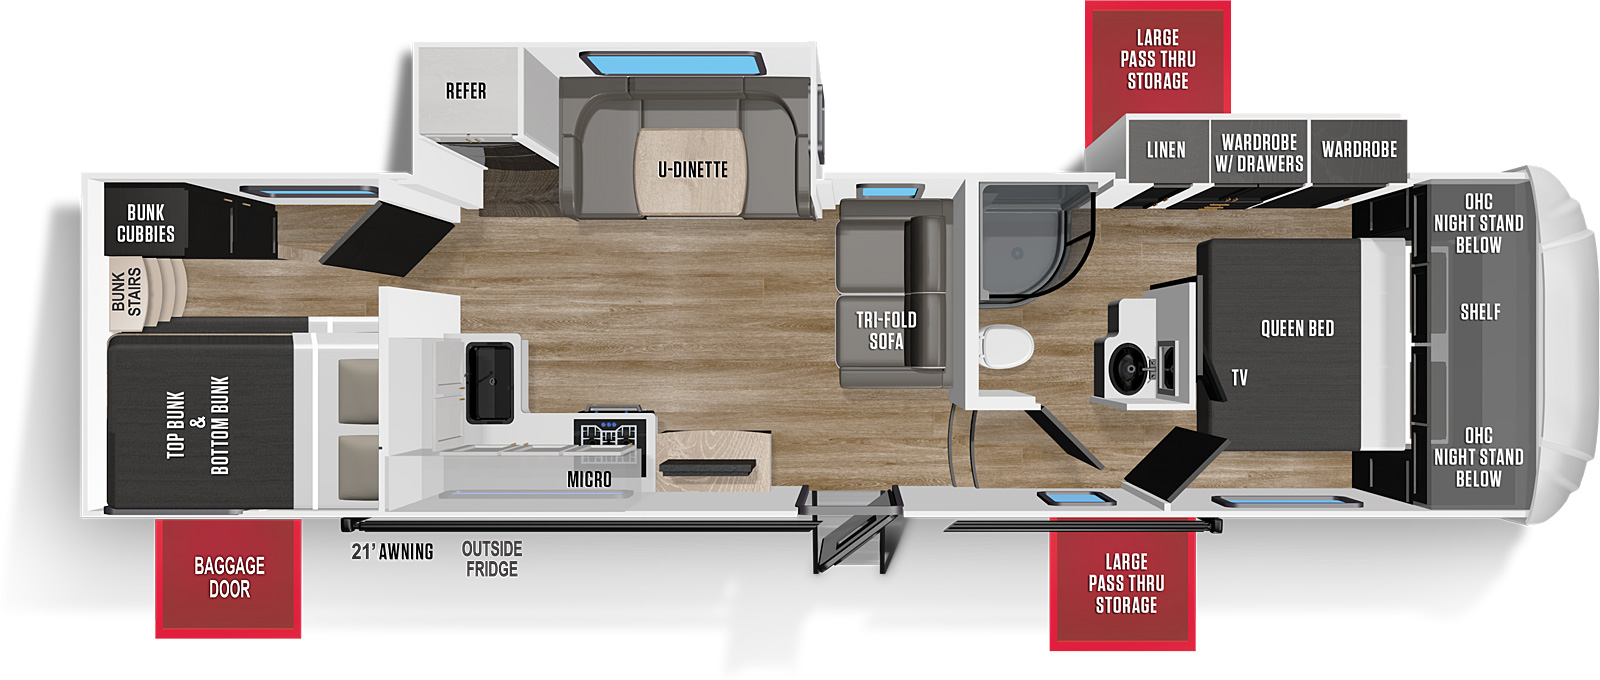 The Wildcat 297BH floorplan exterior sports a 21 foot electric power awning. It also features an outside refrigerator on the door side. This floorplan has two slide outs. Located toward the center of the RV, the entry door leads to a living area on the left and steps leading to a hallway on the right. In the living area on the off-door slide out, is a refrigerator to the left and a U-dinette to the right. A tri-fold sofa is in the front of the living area. In the rear of the living area, by the off-door side is a door leading to the bunkhouse. Steps on the door side of the living room lead to a hallway with the bathroom to the left and the bedroom straight ahead. On the door side of the living area, is an entertainment center. To the rear of that, is an L-shaped Counter top with a stove and sink. A microwave is above the stove area. Overhead cabinets are above the remaining countertop area. Located in the rear of the RV, the bunk house has top and bottom bunks on the door-side and bunk cubbies on the off-door side. A set of bunk stairs is against the rear wall between the bunk beds and the cubbies. The front of the RV features a bathroom with a shower, toilet, sink, linen storage and sliding door to the bedroom. The bedroom houses a front queen bed with nightstands and wardrobes on either side. 